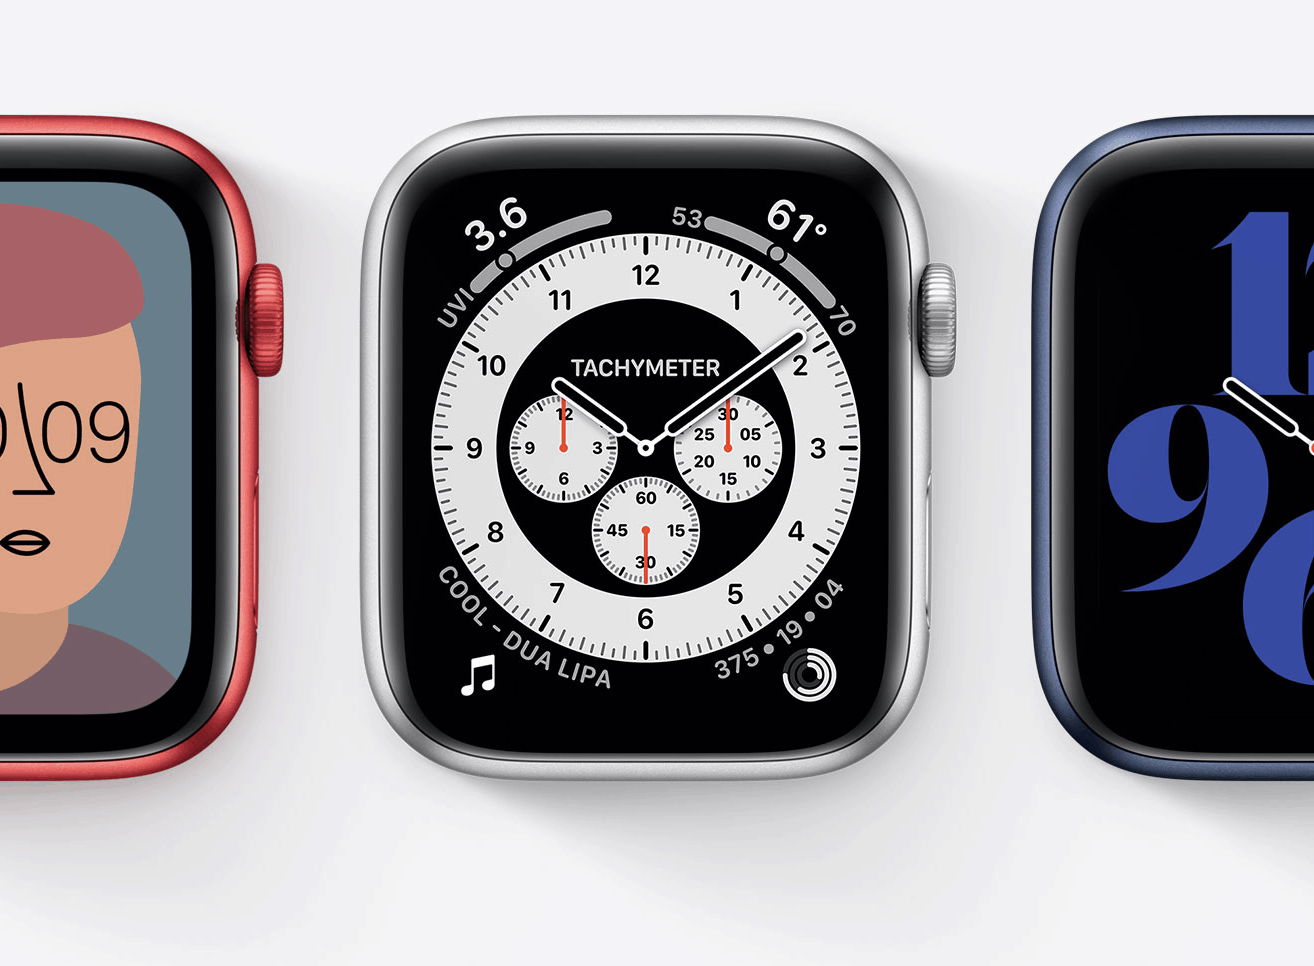 Introducing the Apple Watch Series 6